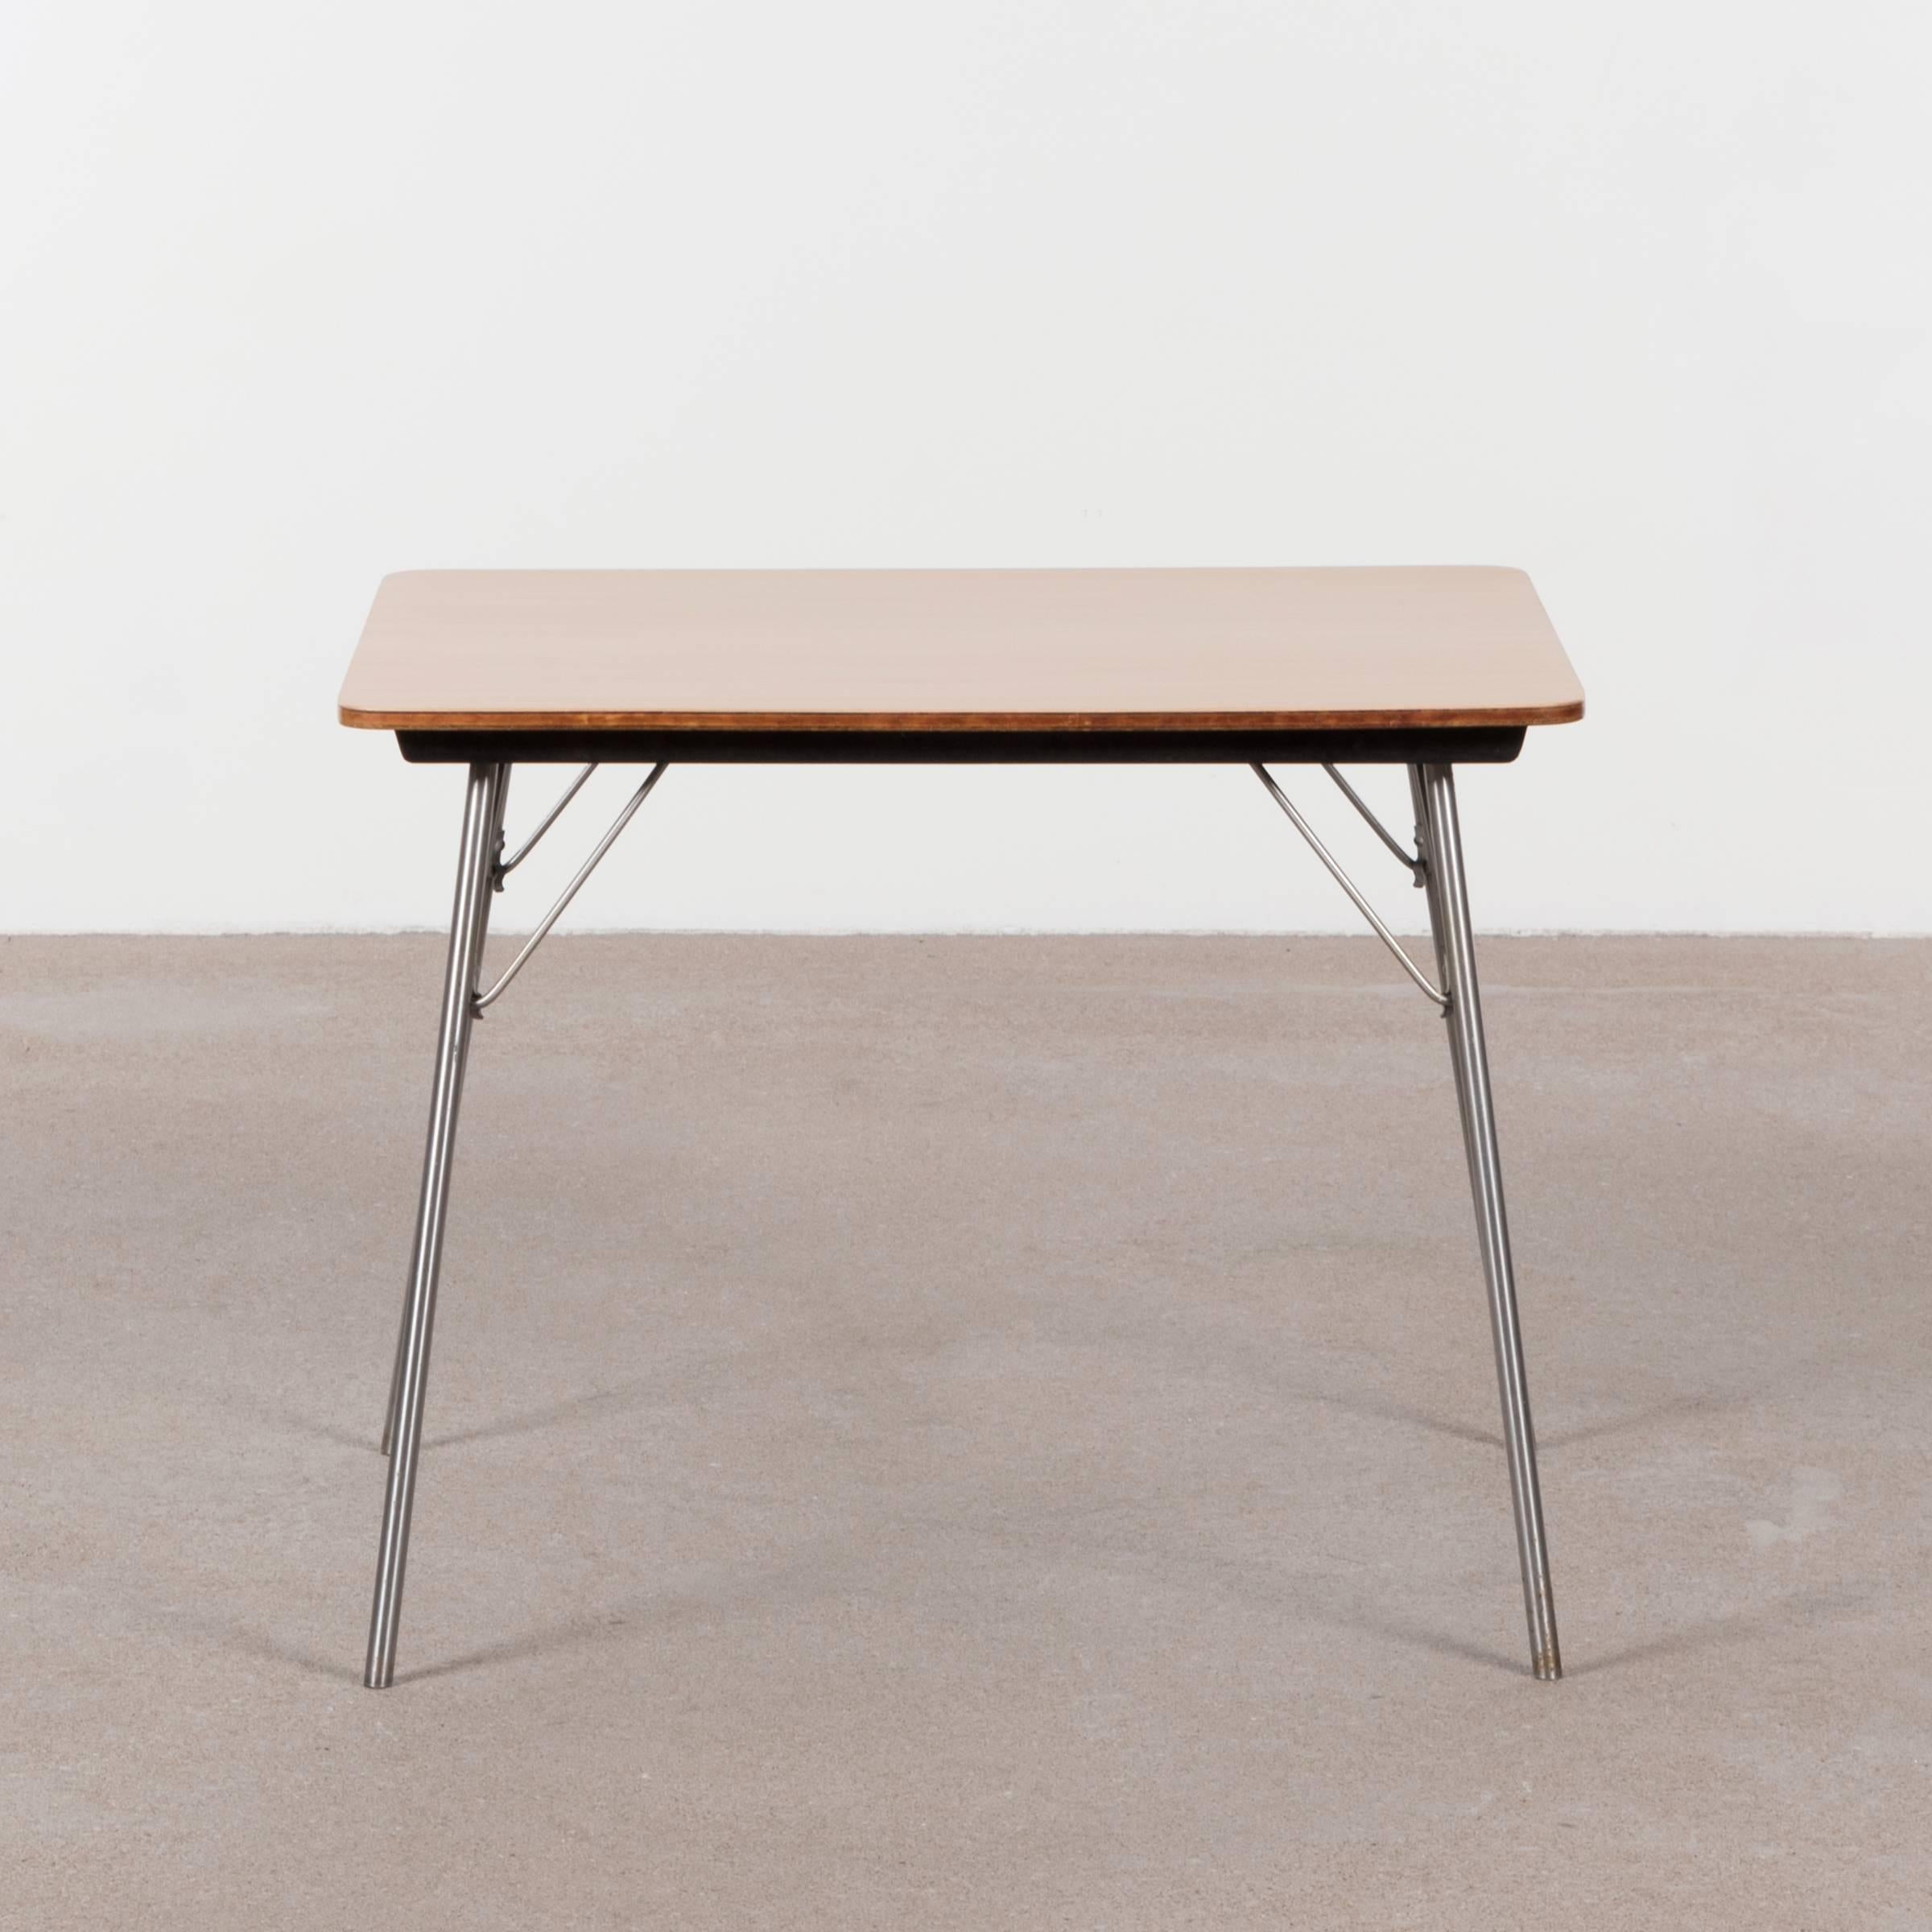 Early and rare Eames IT-1 Incidental Table in production till 1956. Metal folding legs with plywood tabletop finished with Maple wood veneer (restored). Excellent condition and hard to find table.